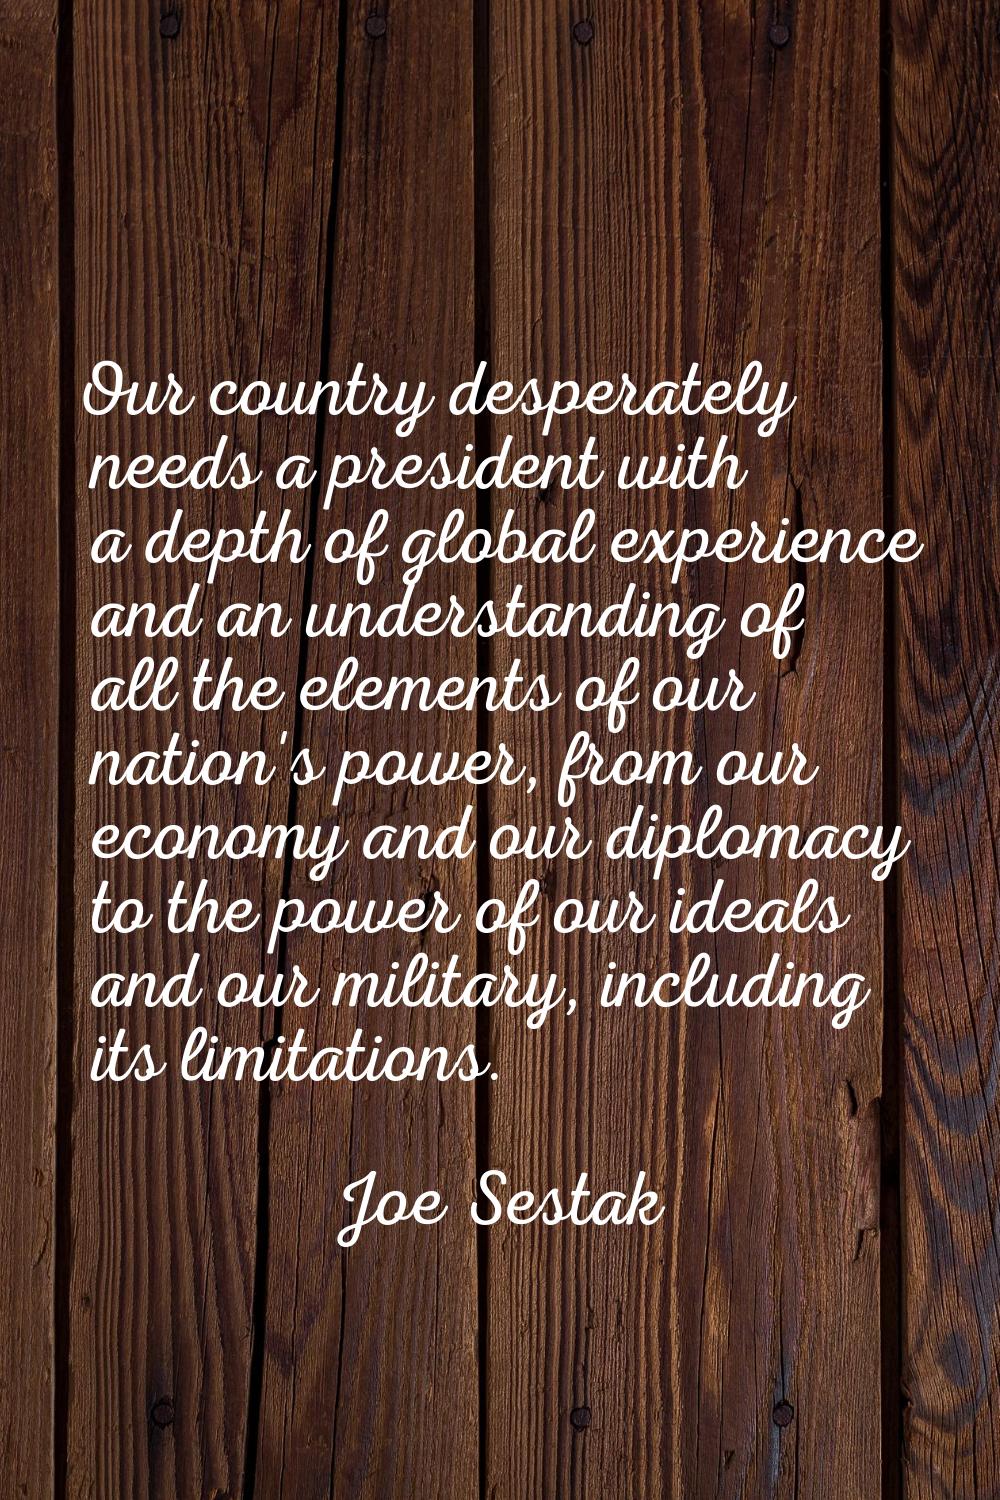 Our country desperately needs a president with a depth of global experience and an understanding of